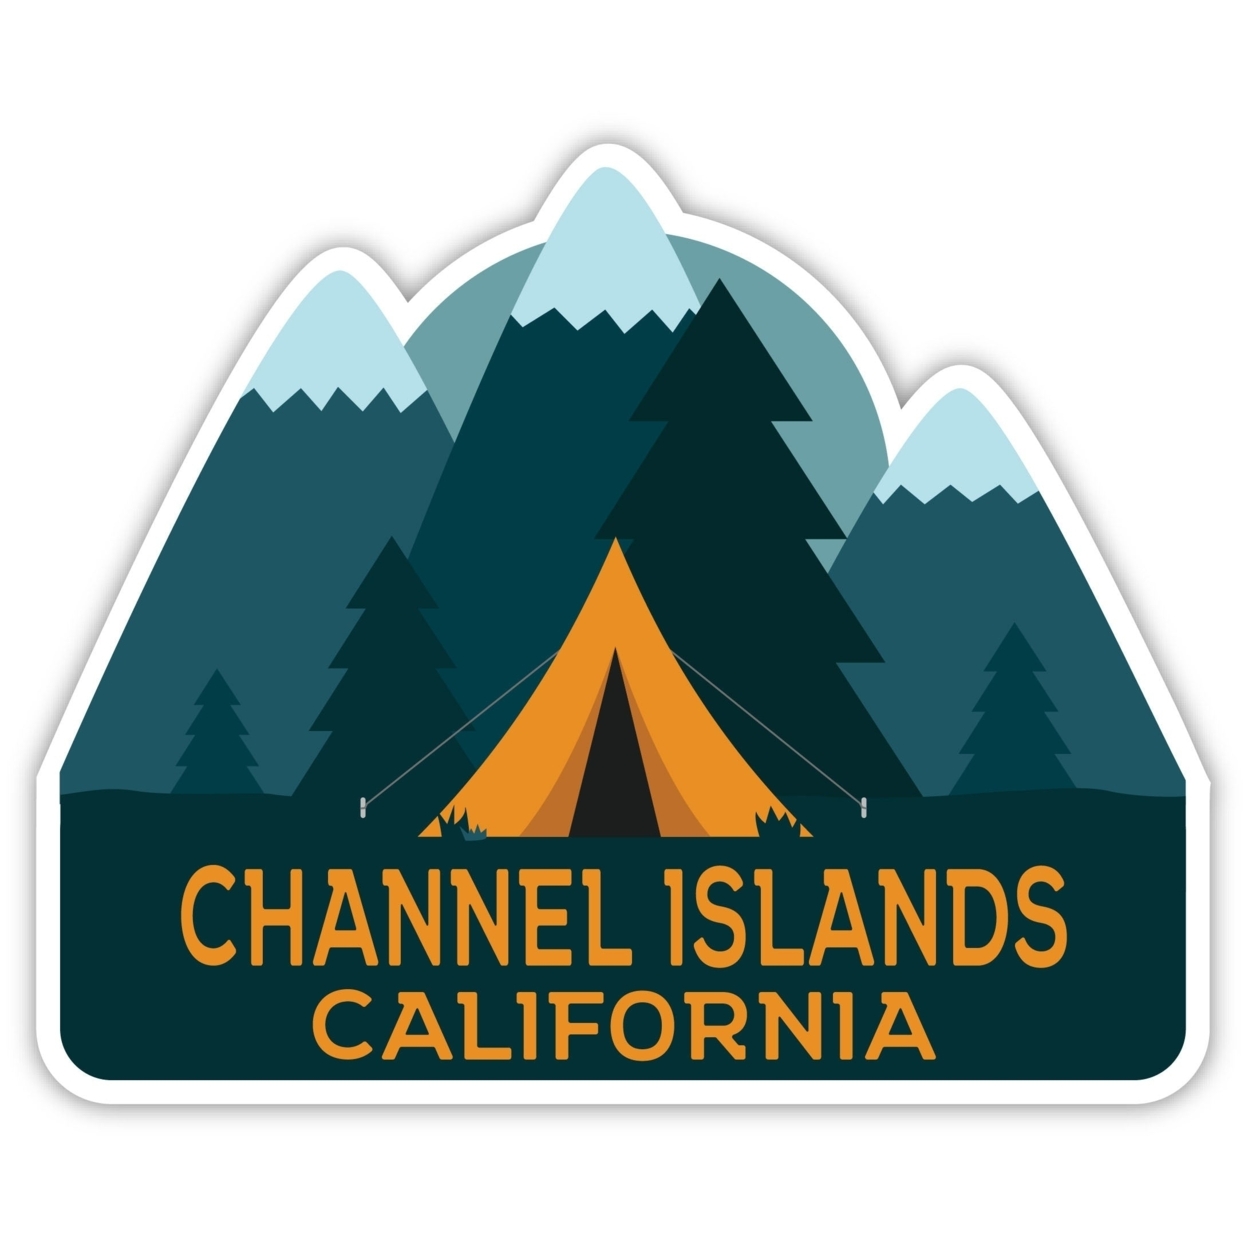 Channel Islands California Souvenir Decorative Stickers (Choose Theme And Size) - 4-Pack, 12-Inch, Tent